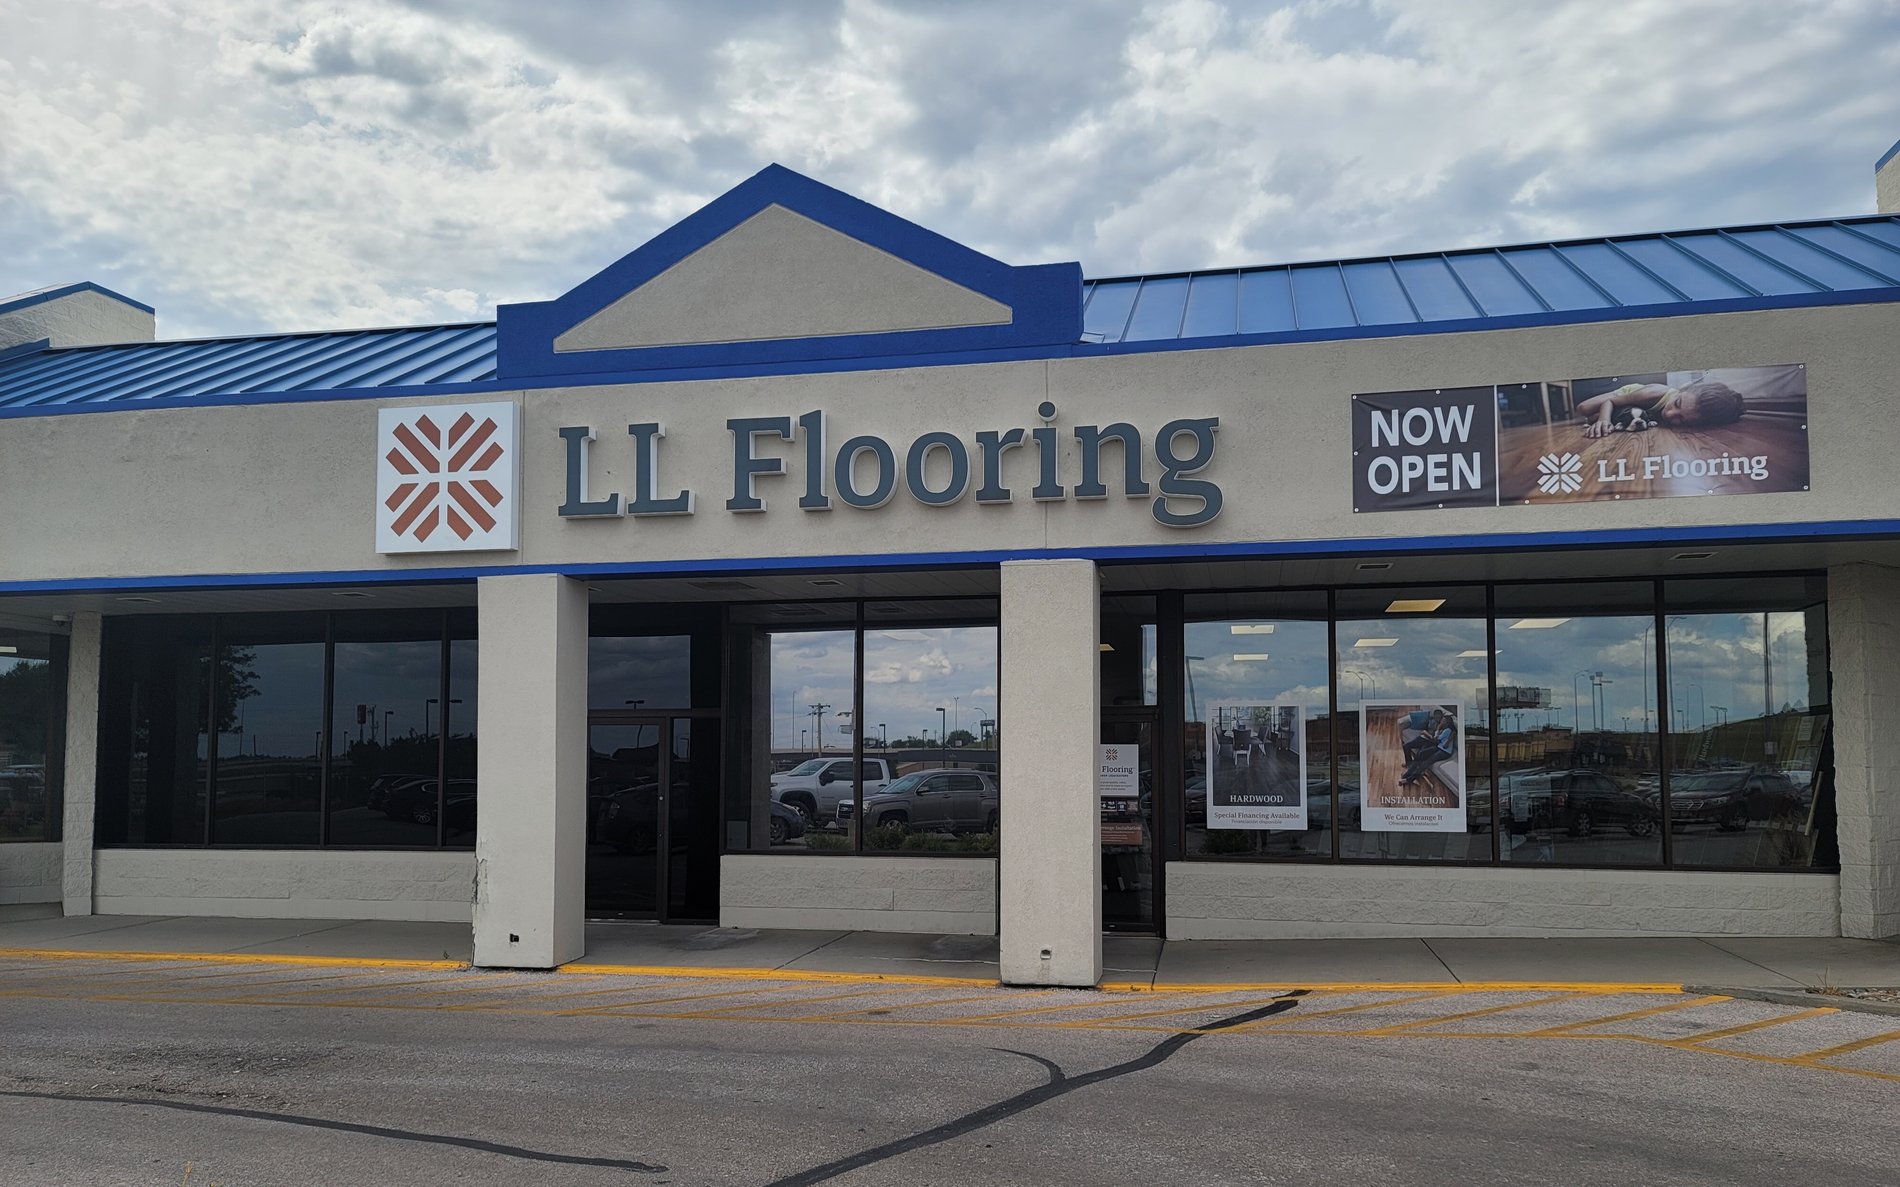 LL Flooring #1448 Rapid City | 2255 N. Haines Avenue | Storefront